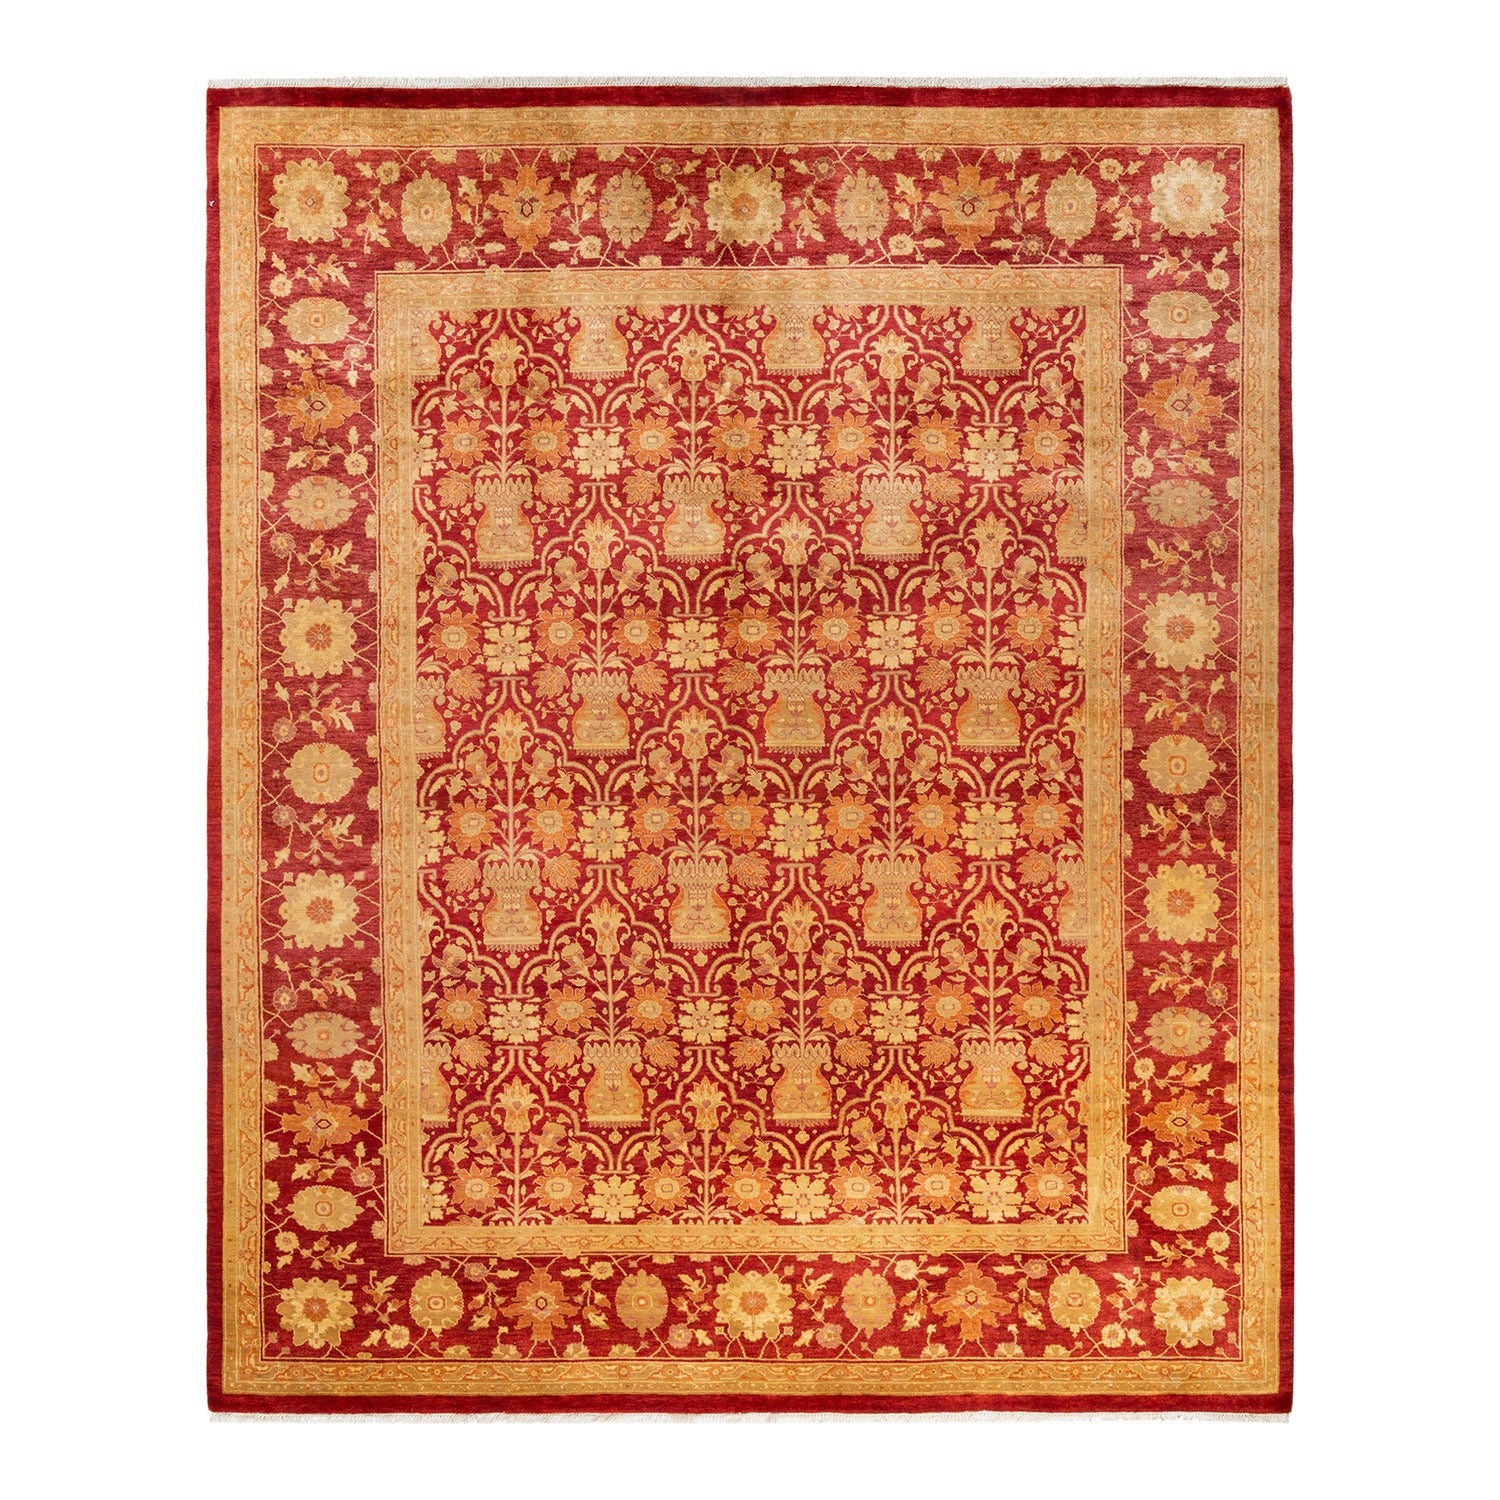 Traditional Persian/Oriental rug with intricate symmetrical design and vibrant colors.